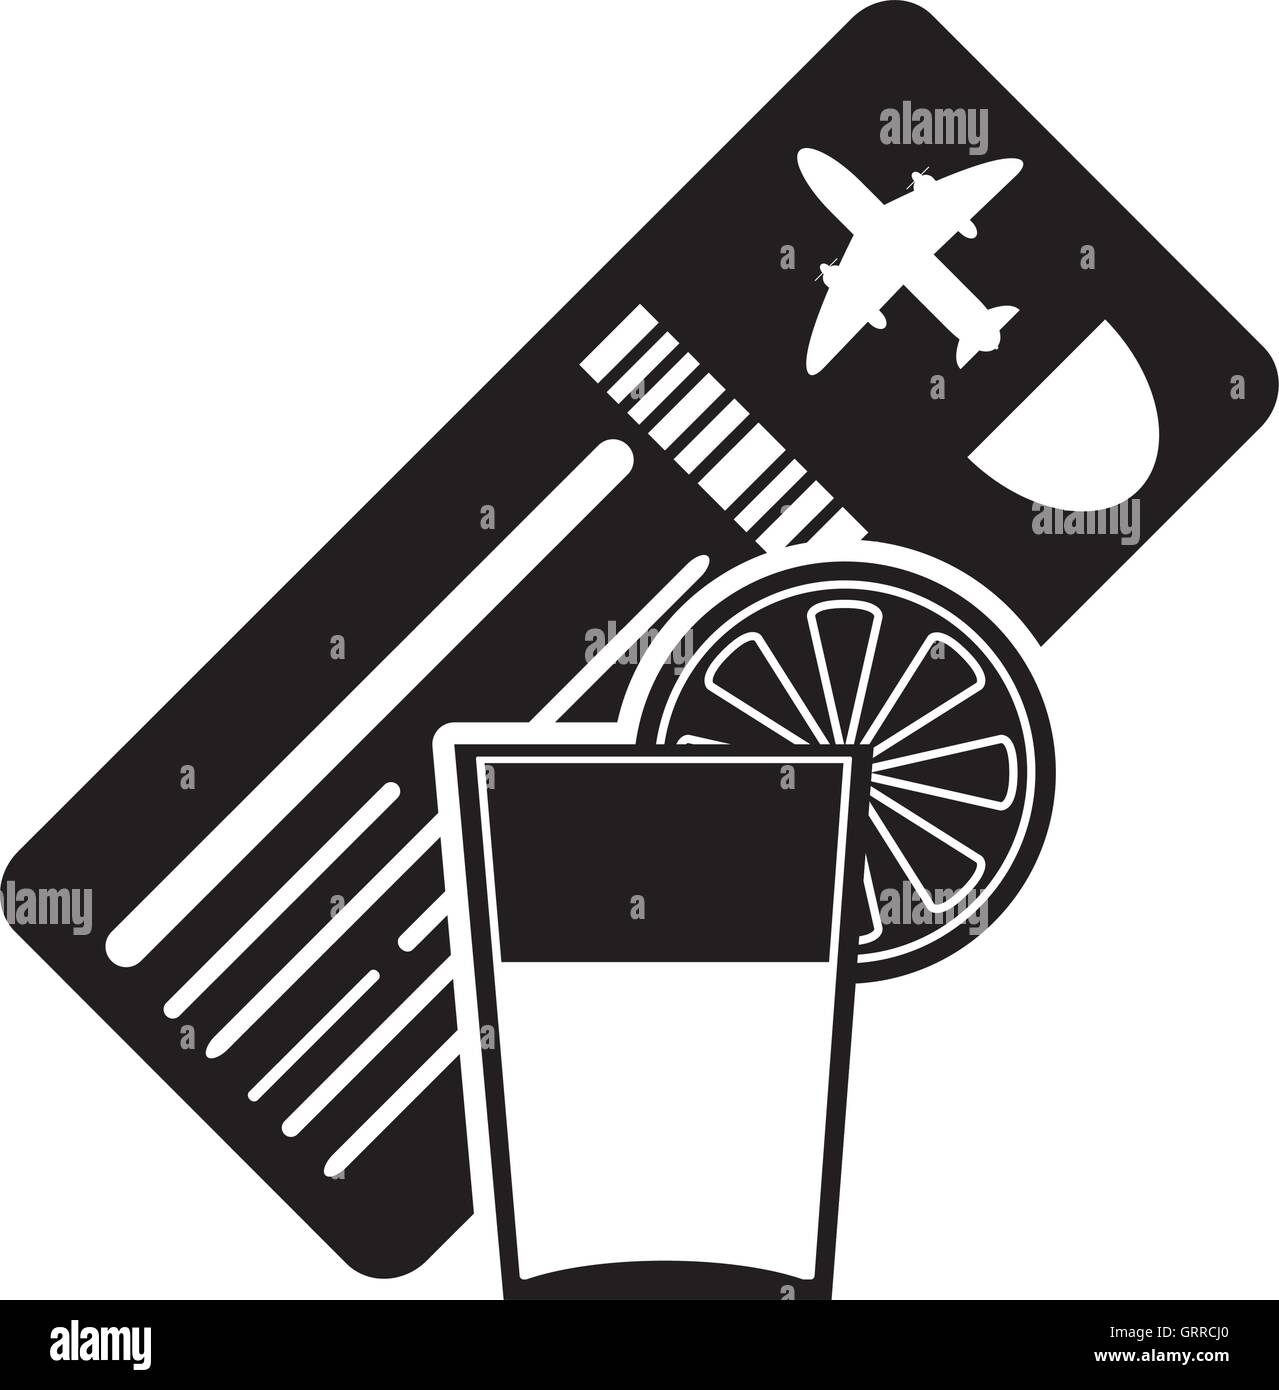 boarding pass or ticket icon Stock Vector